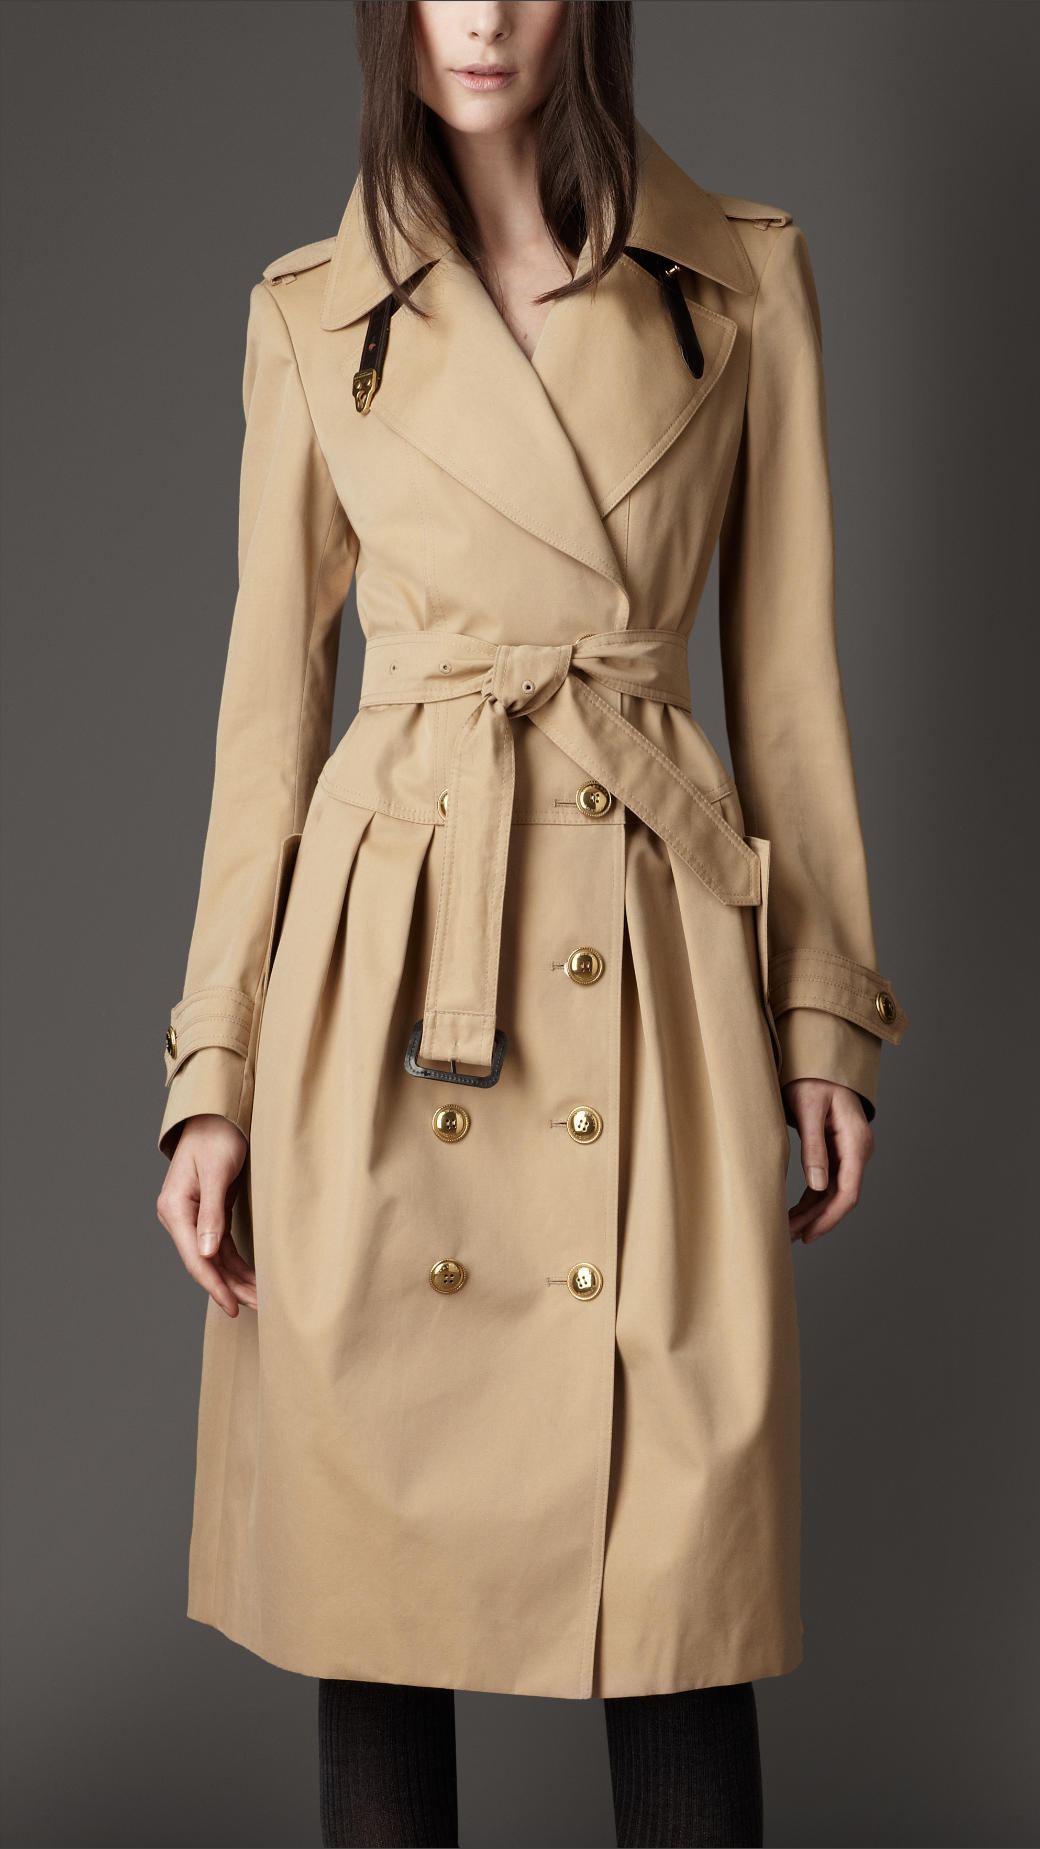 Lyst - Burberry Long Cotton Gabardine Leather Trim Trench Coat in Natural